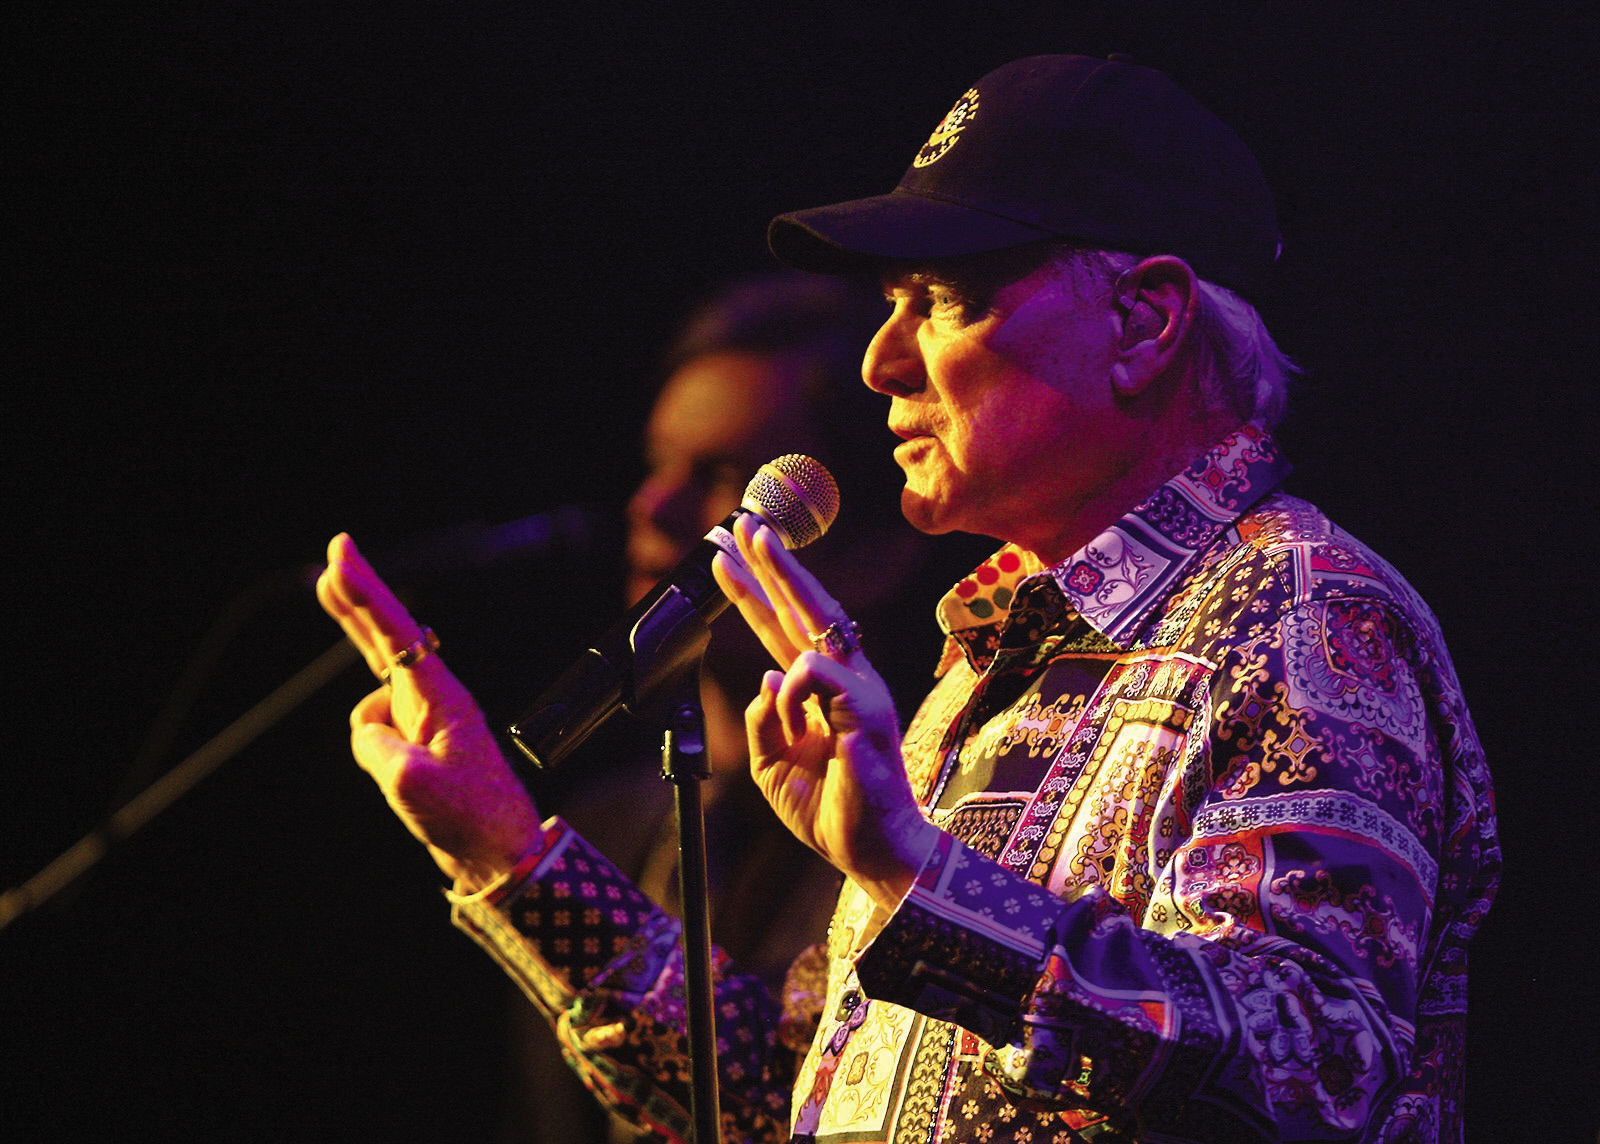 Original band member Mike Love and The Beach Boys perform at the Mississippi Moon Bar in the Diamond Jo Casino on Saturday. PHOTO CREDIT: Nicki Kohl